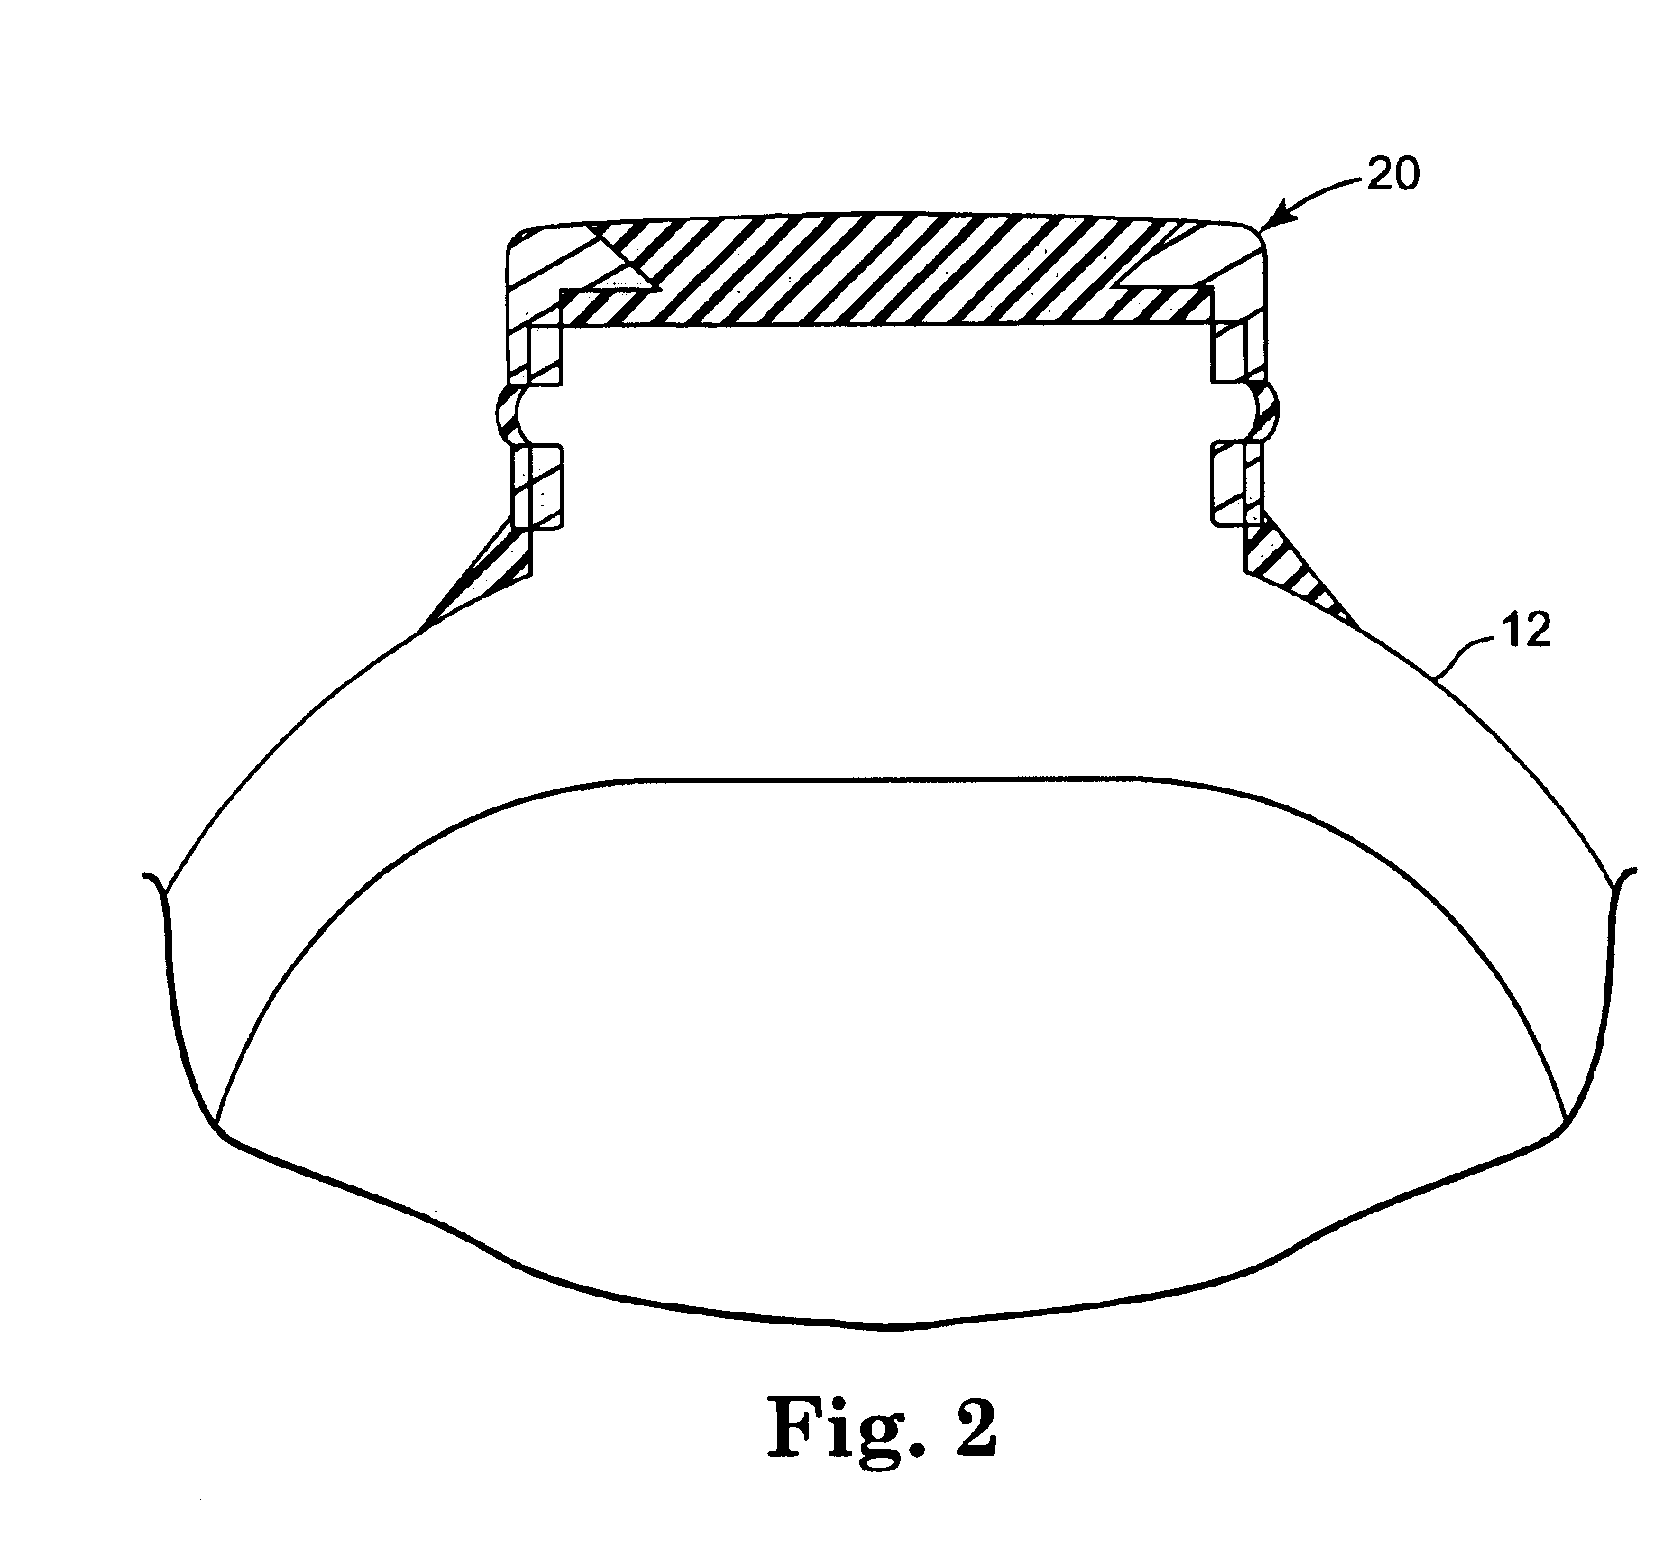 Implantable penile prosthesis fluid transfer systems and methods